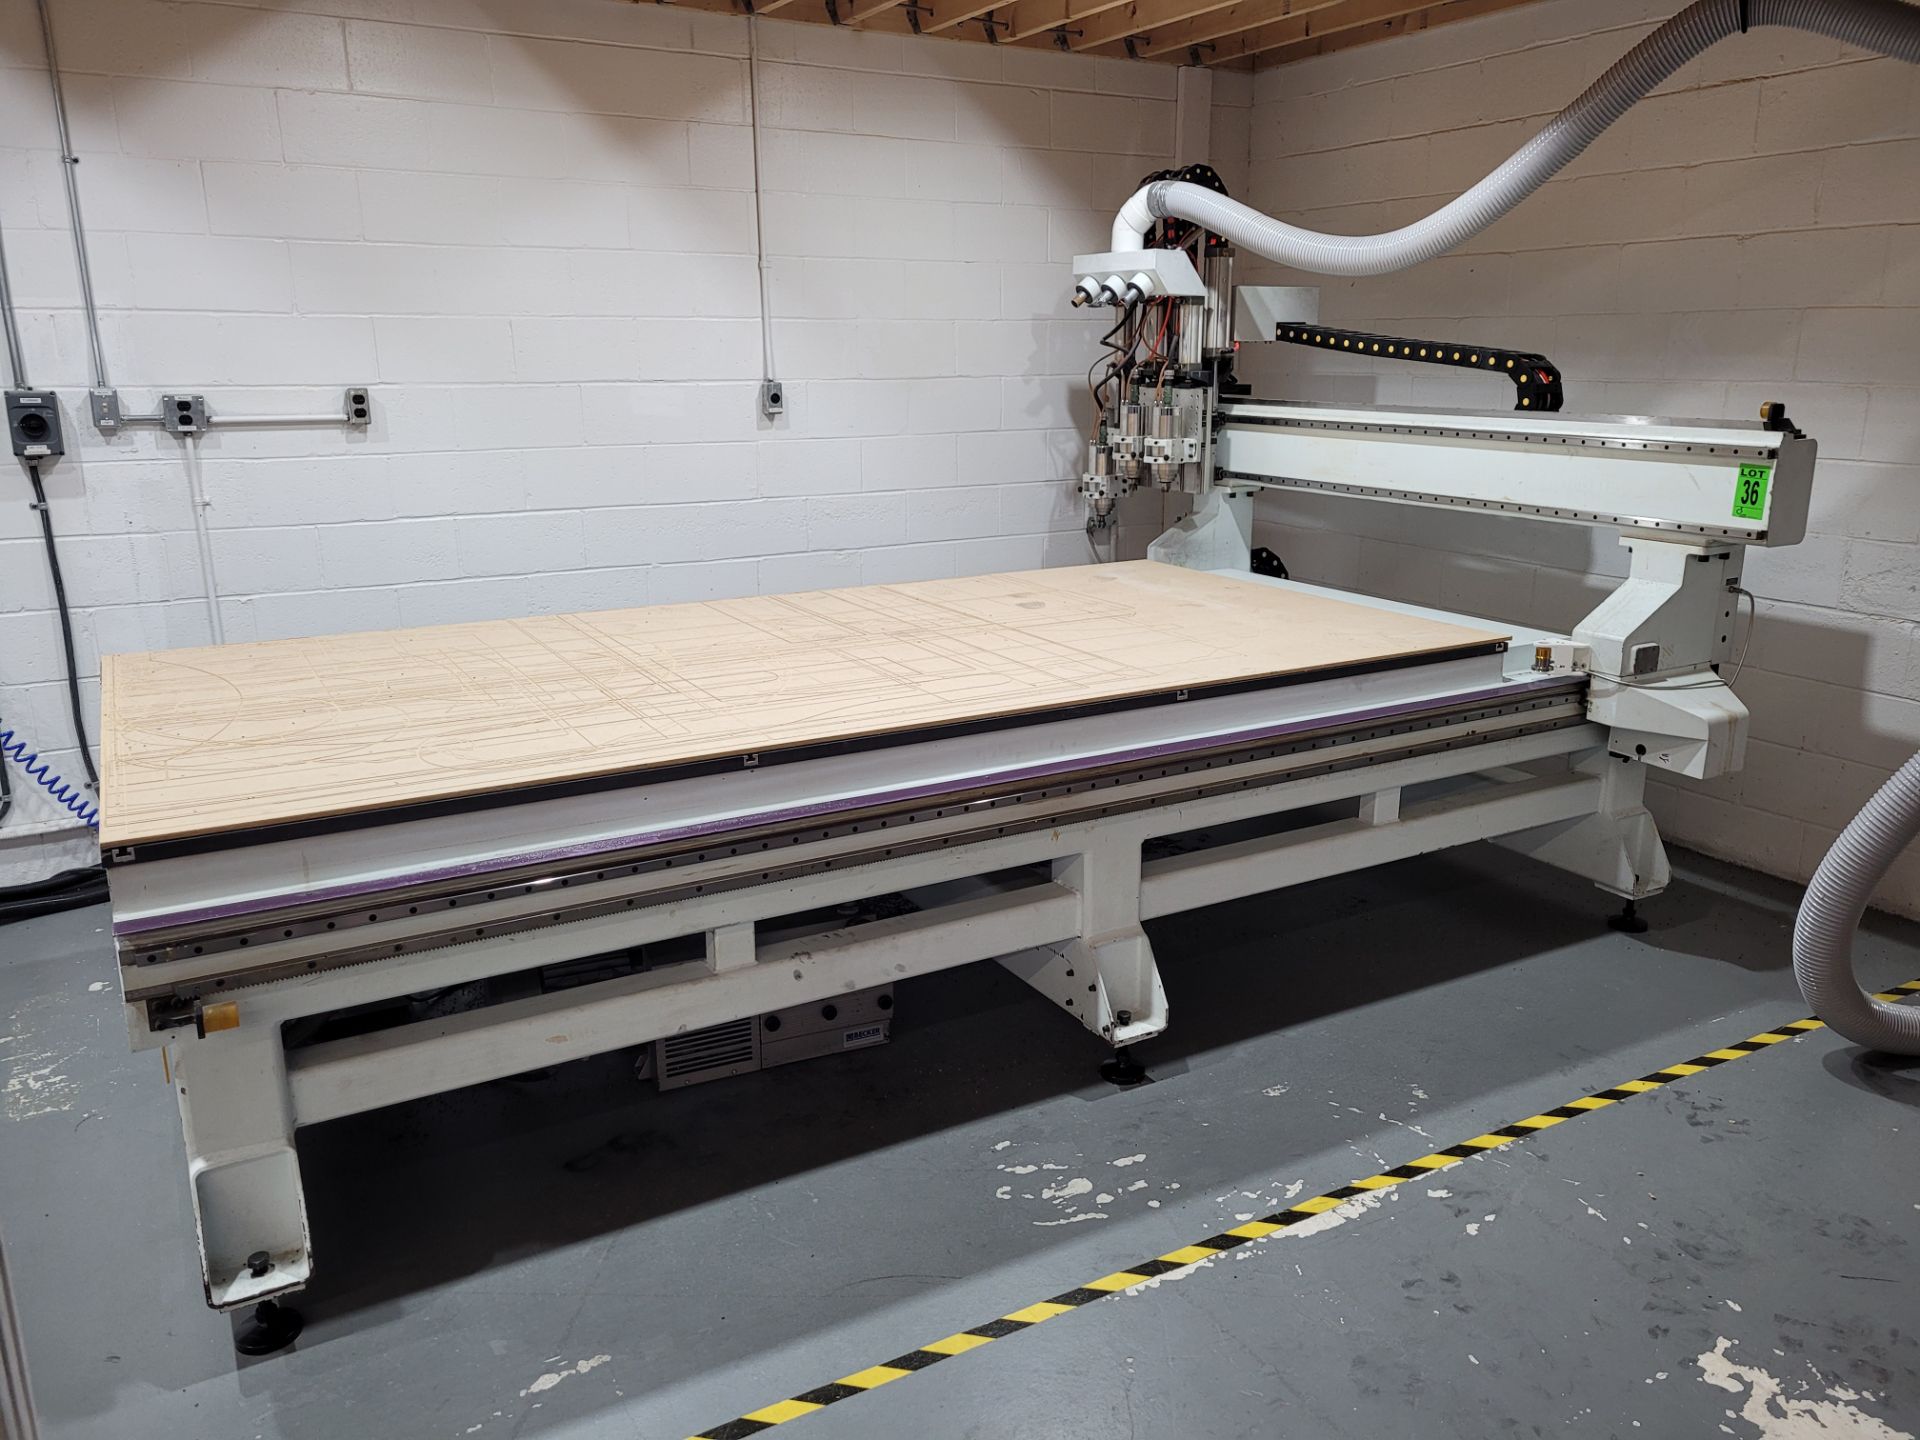 2015 SUDA ATC CNC Router mod. MG1630C, 3-Head System with Accessories and CRAFTEX mod. FM-300 Collec - Image 10 of 51